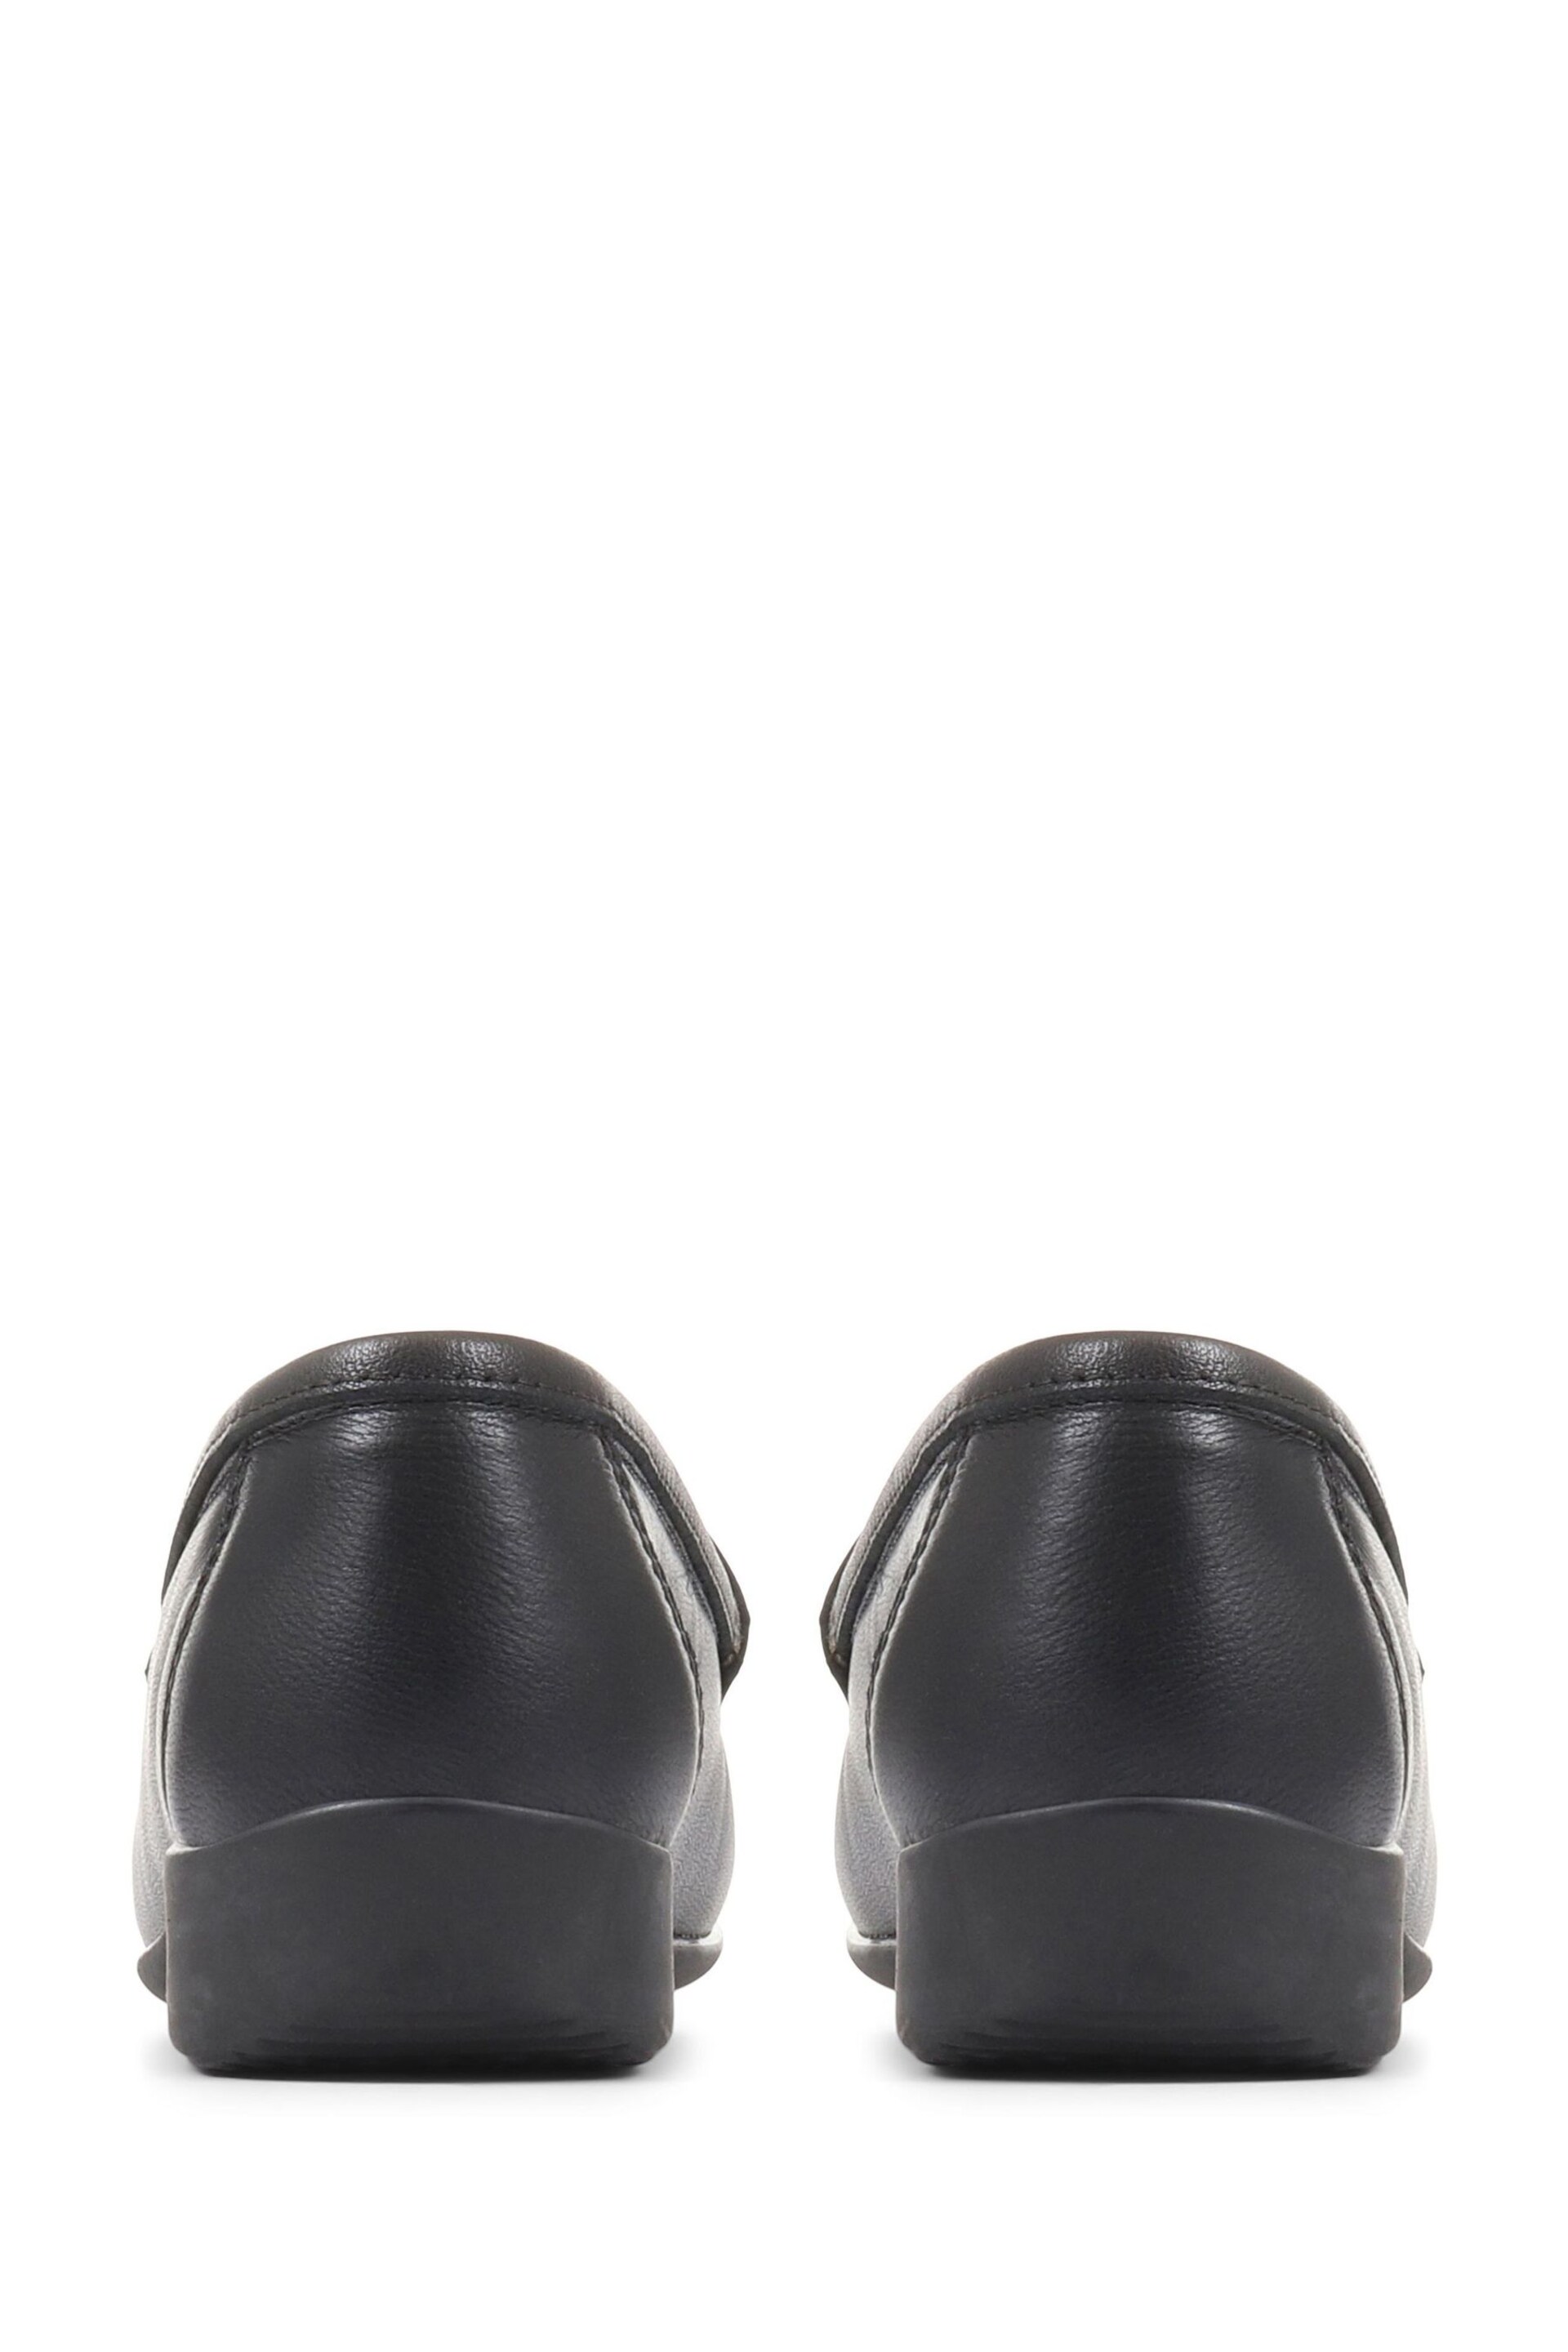 Pavers Wide Fit Black Leather Loafers With Tassel - Image 3 of 5